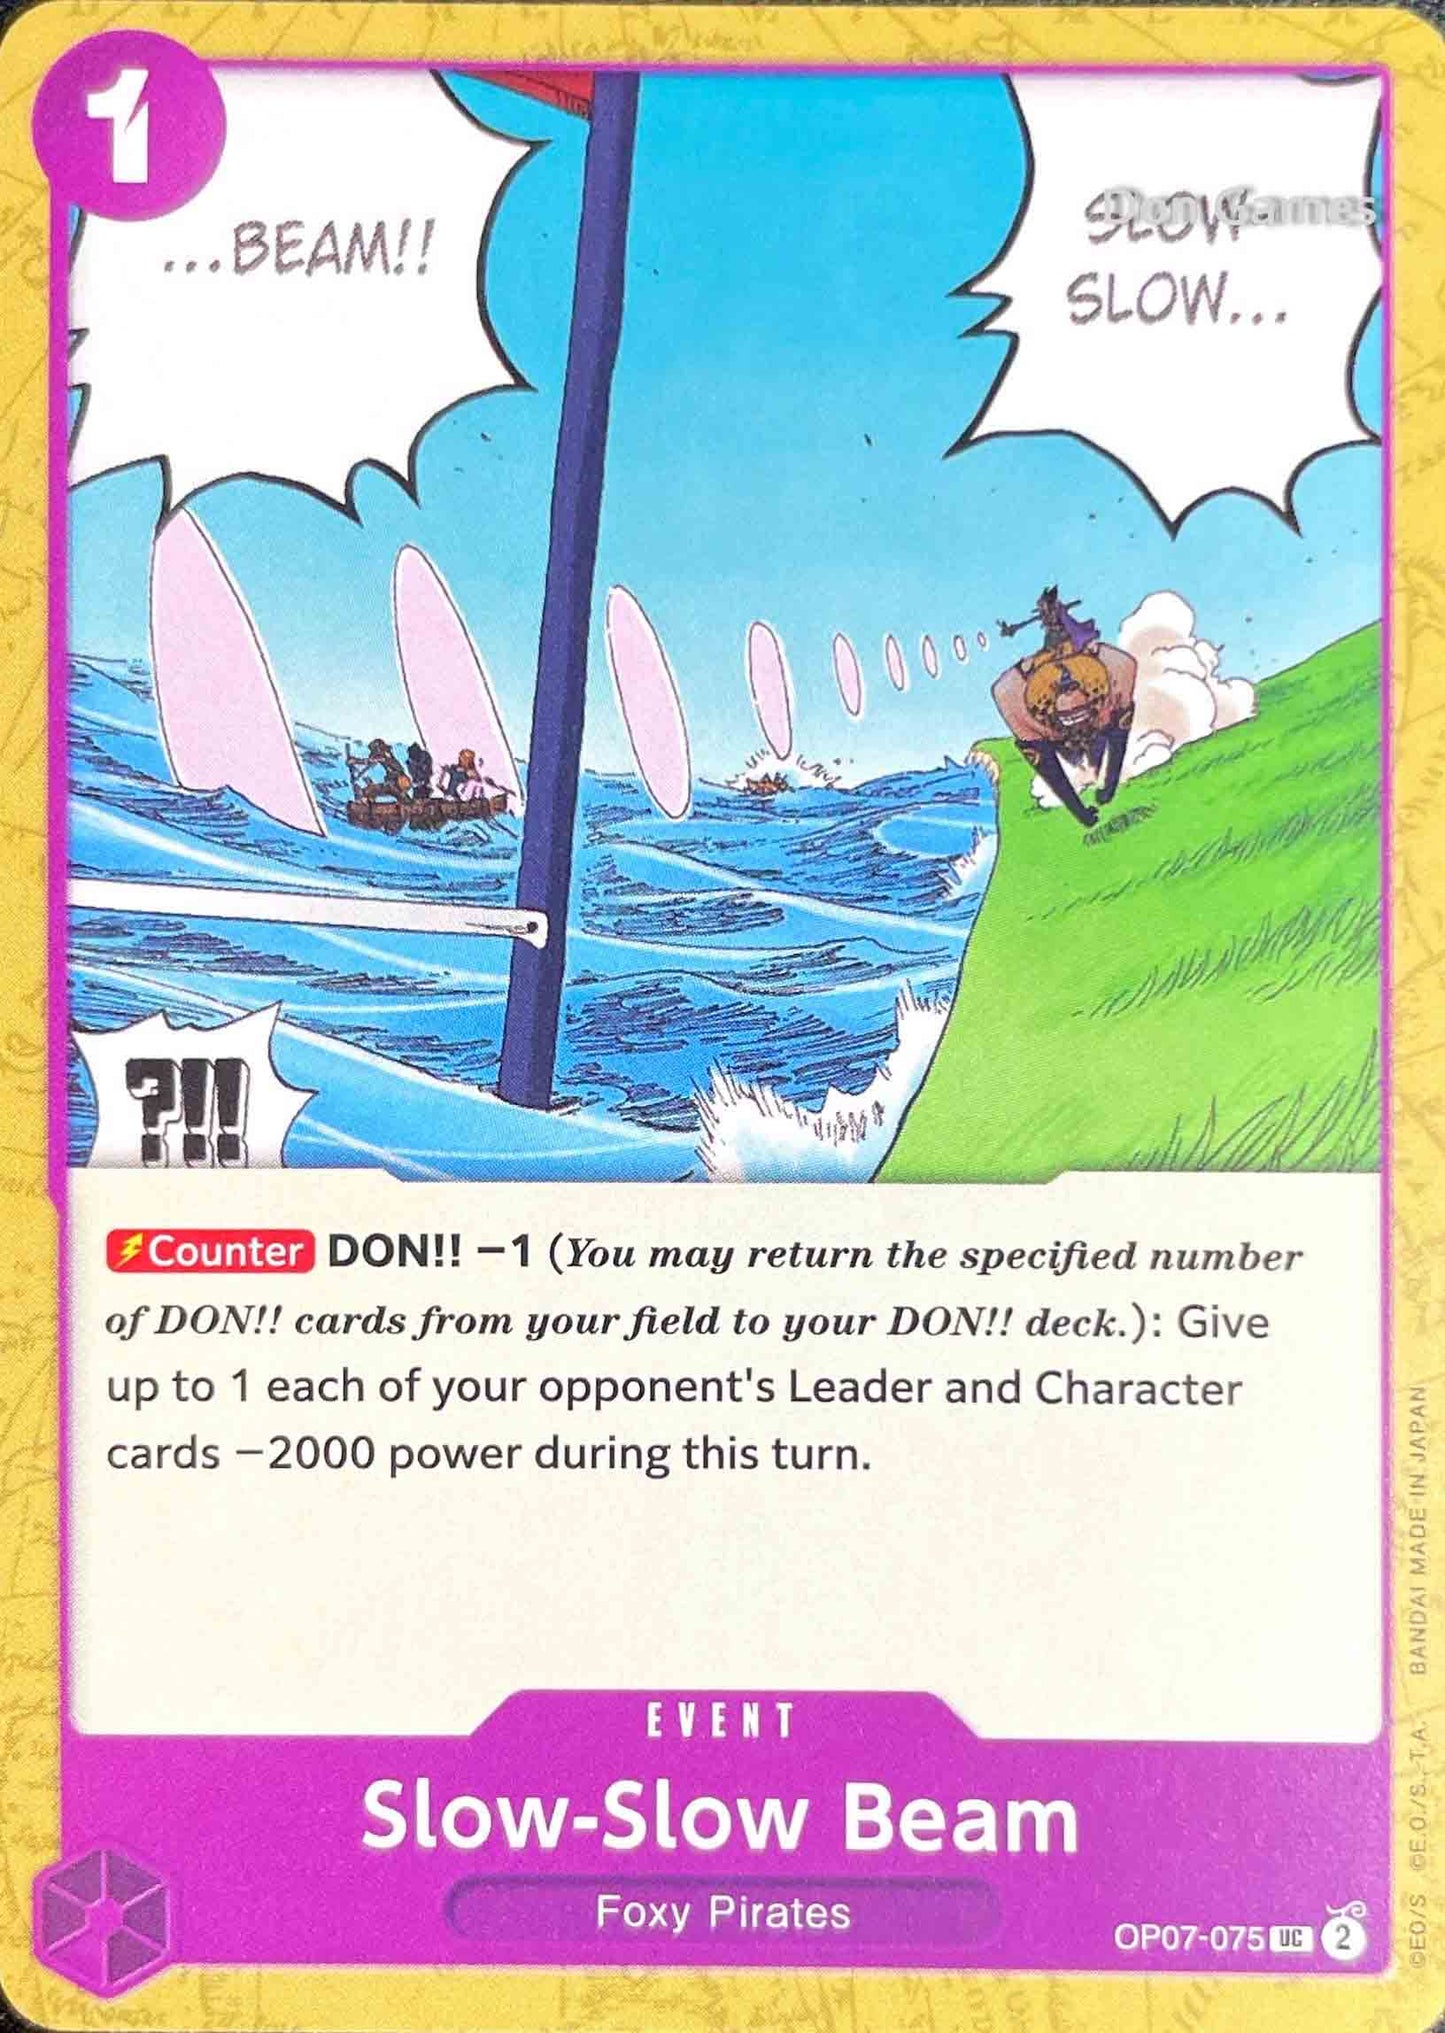 OP07-075 Slow-Slow Beam Event Card